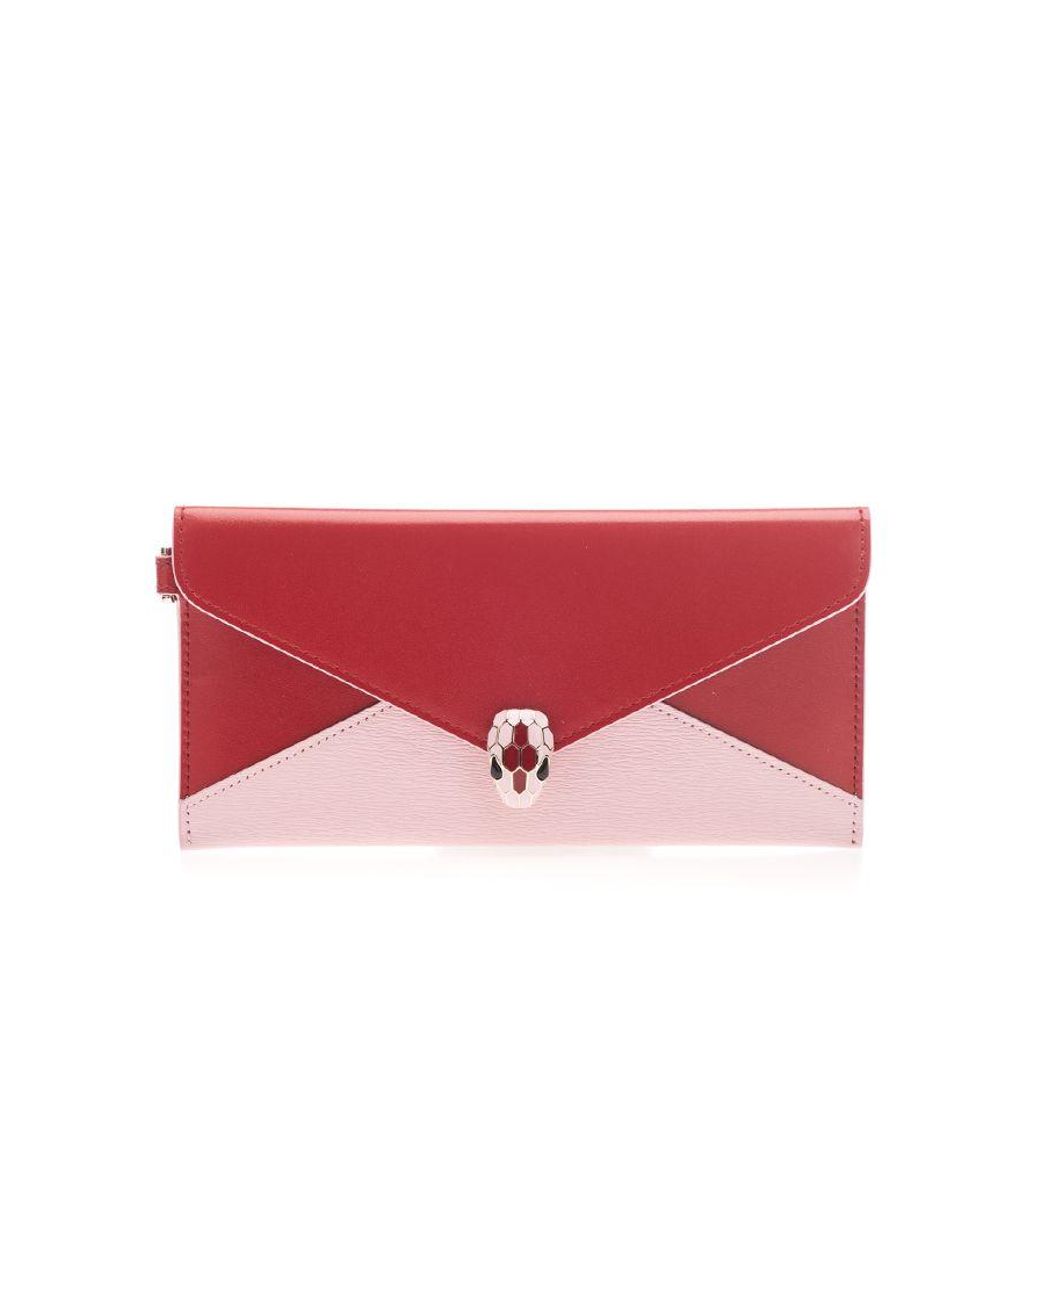 BVLGARI Leather Pouch in Red - Lyst